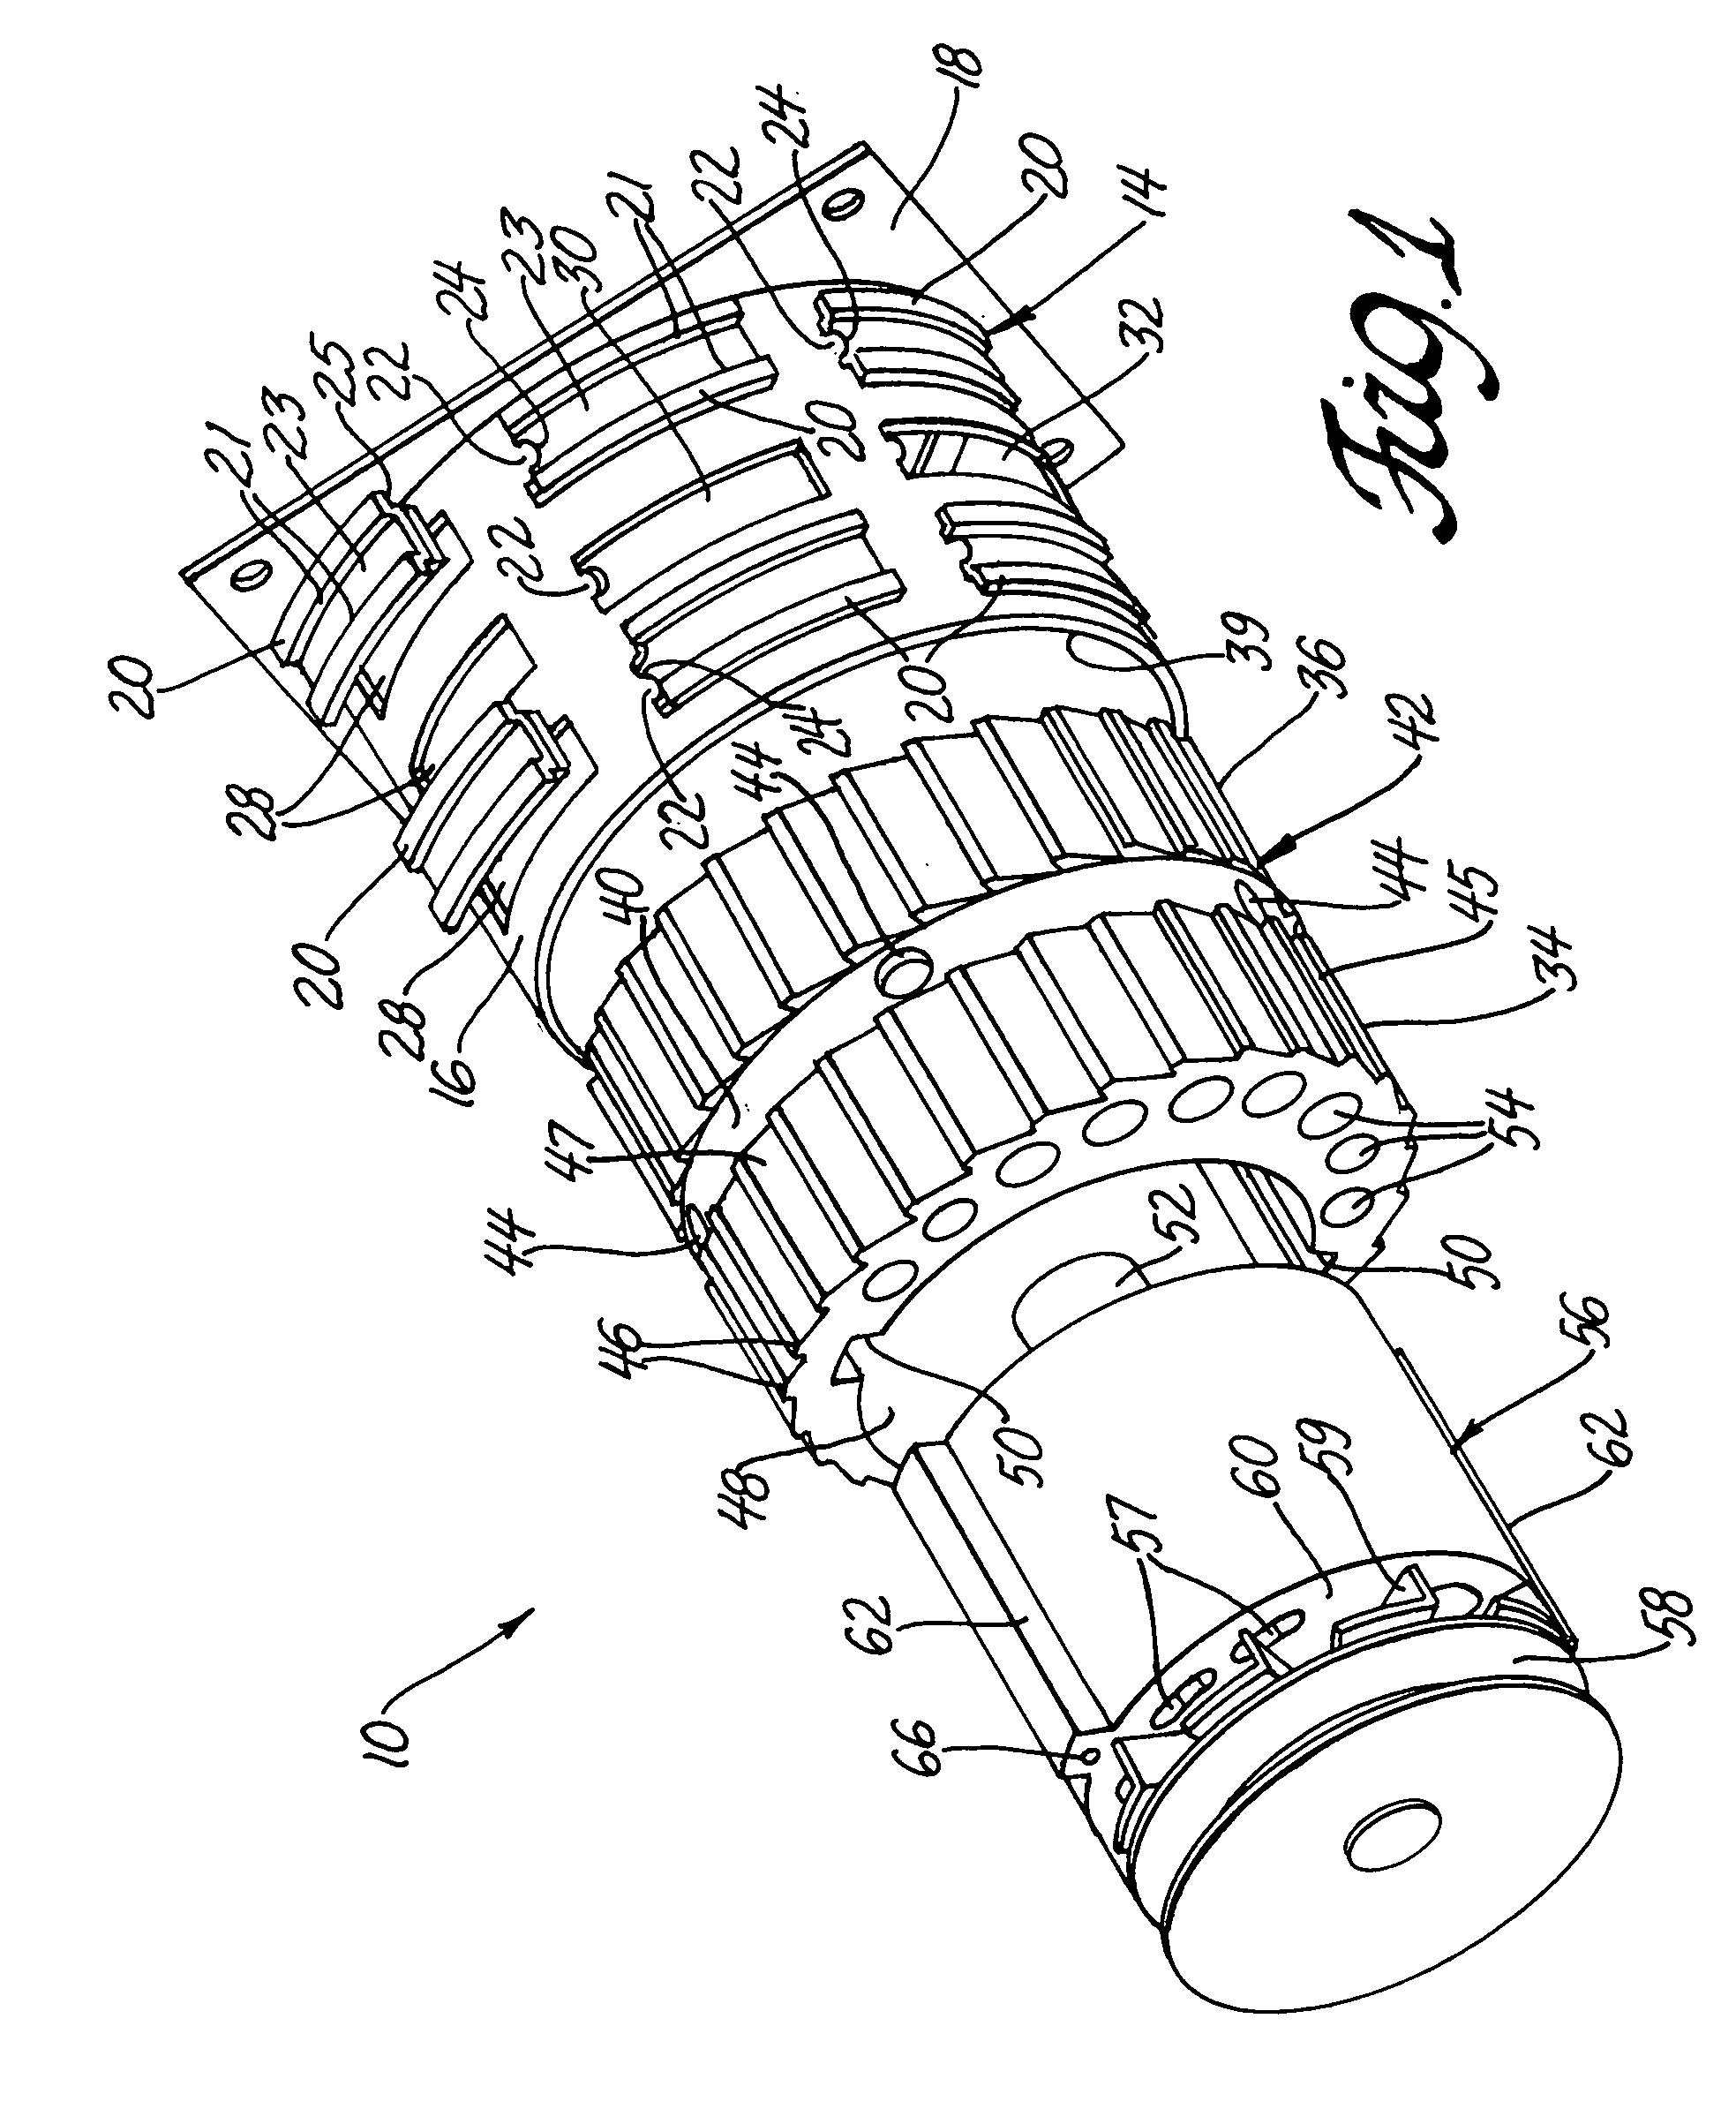 Eccentric mounting and adjustment system for belt driven devices